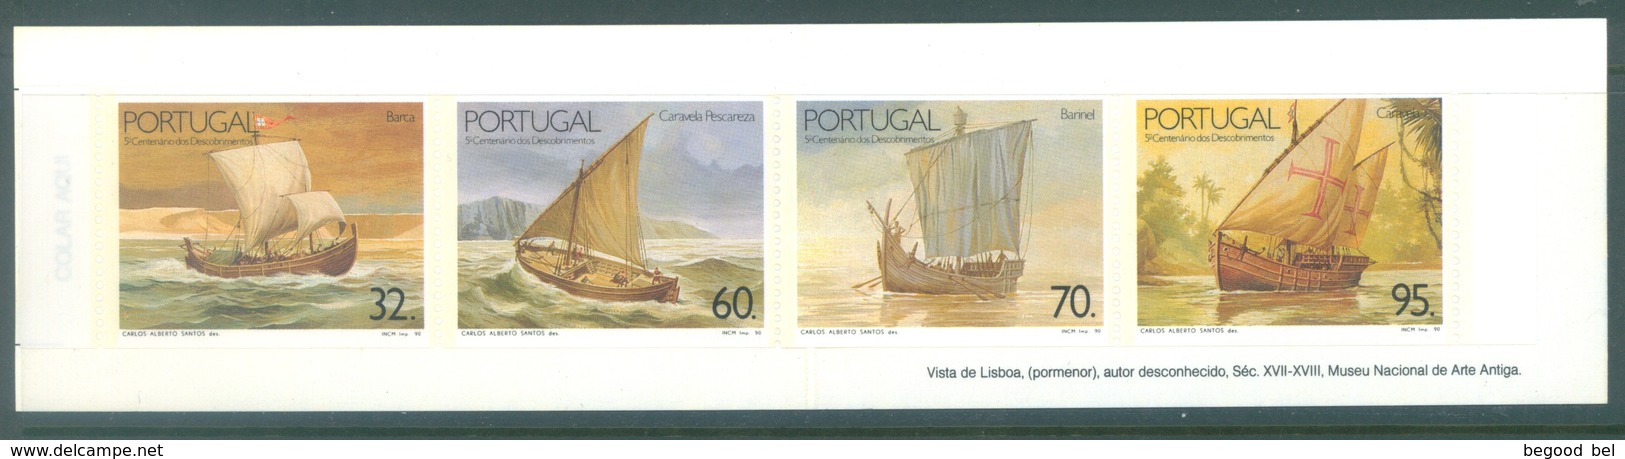 PORTUGAL - 1990 - MNH/*** LUXE BOOKLET - BATEAUX BOATS - Mi  MH8 Yv  C1809a - Lot 19416 - Carnets